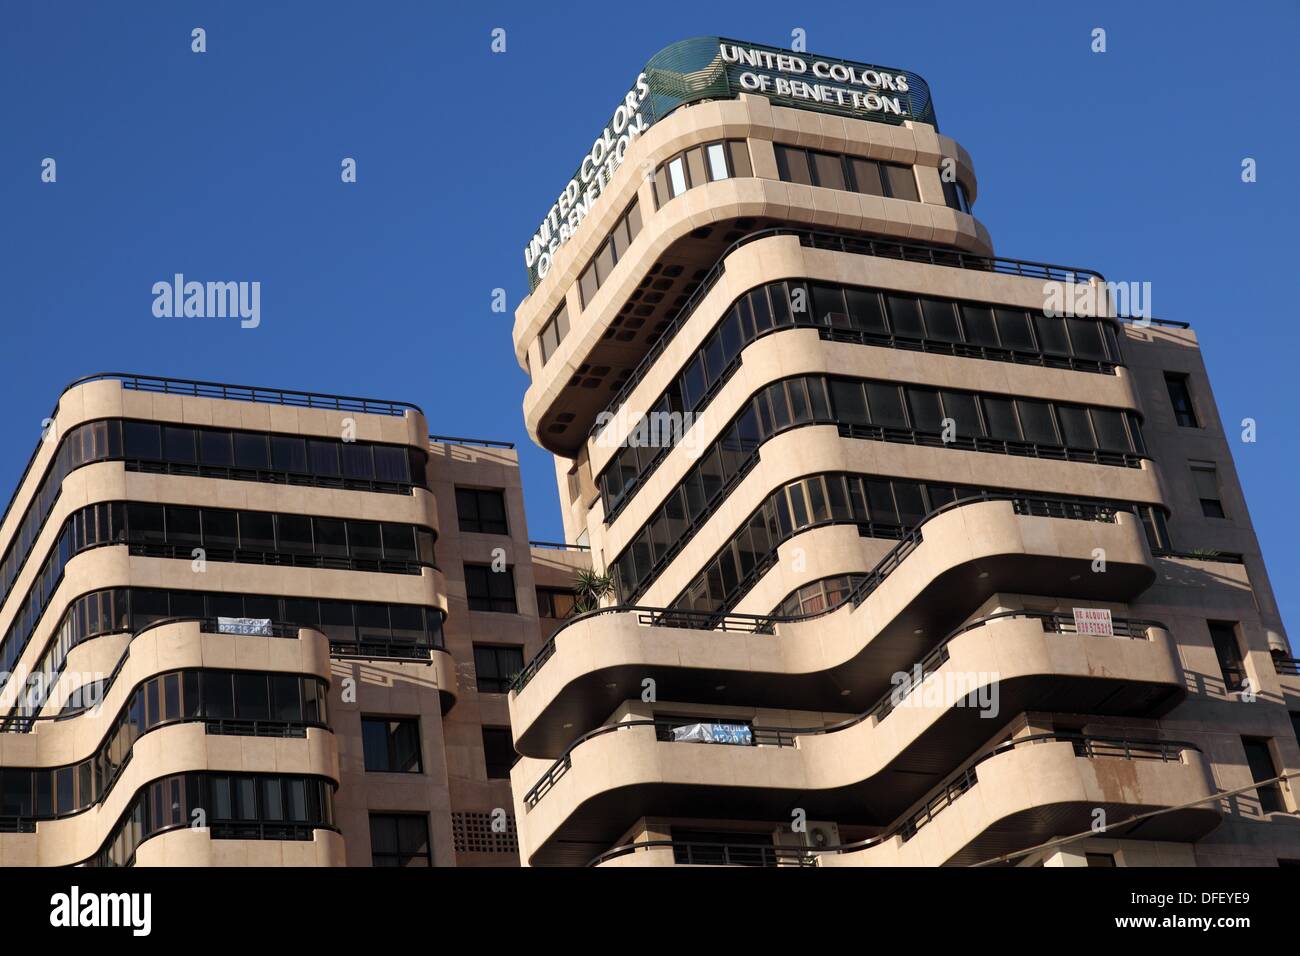 United Colors of Benetton sign on the top of a building, Tenerife, Canary  Islands, Spain Stock Photo - Alamy